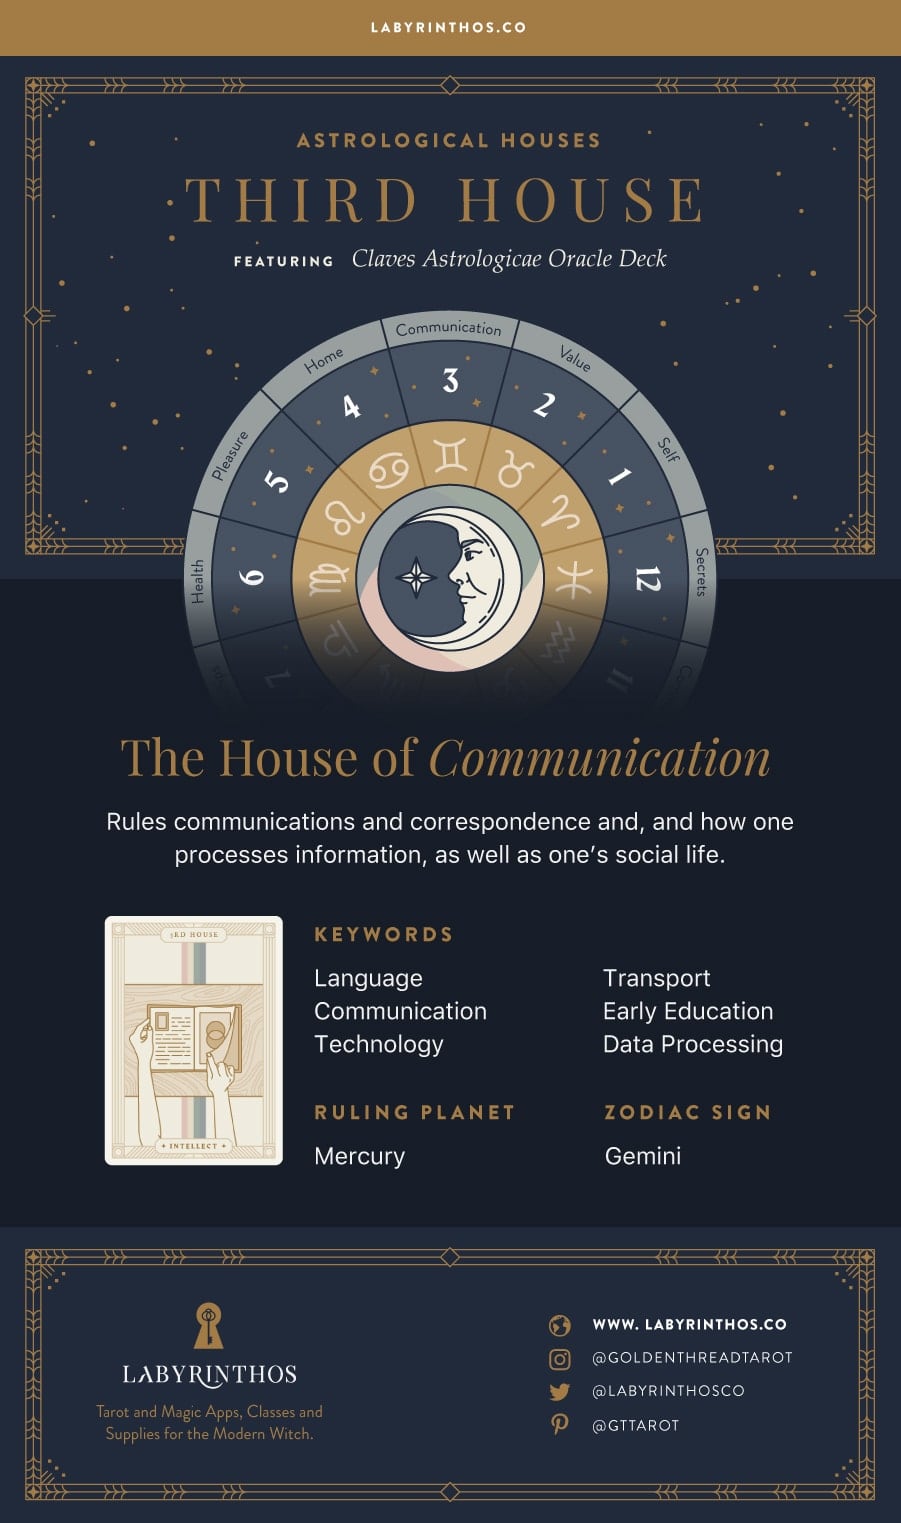 The Third House: The House of Communication - the 12 Houses of Astrology Full Infographic